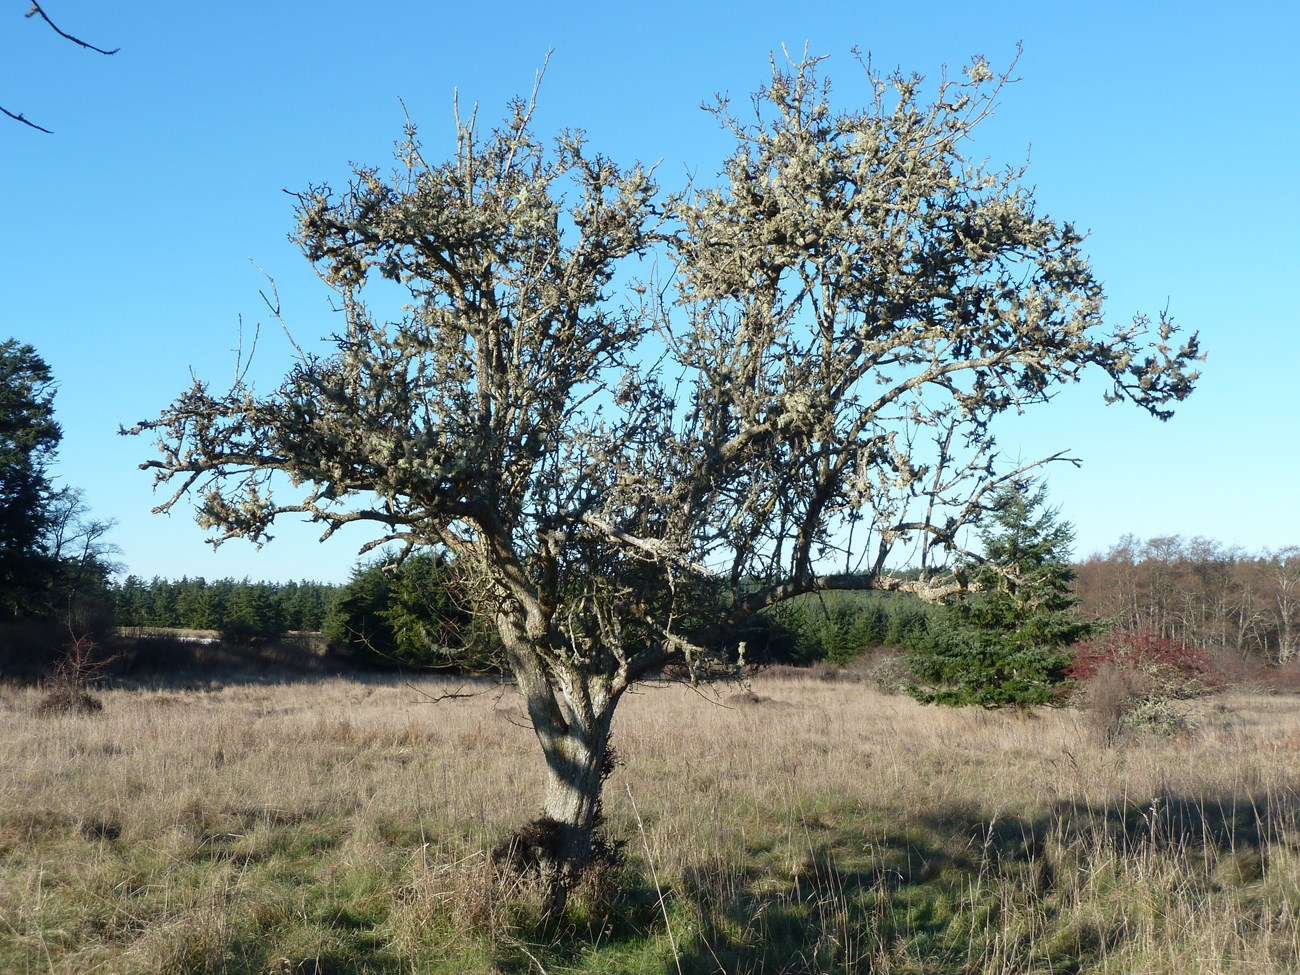 Leafless fruit tree with dense branches and an upright, open canopy, surrounded by open grassy area.